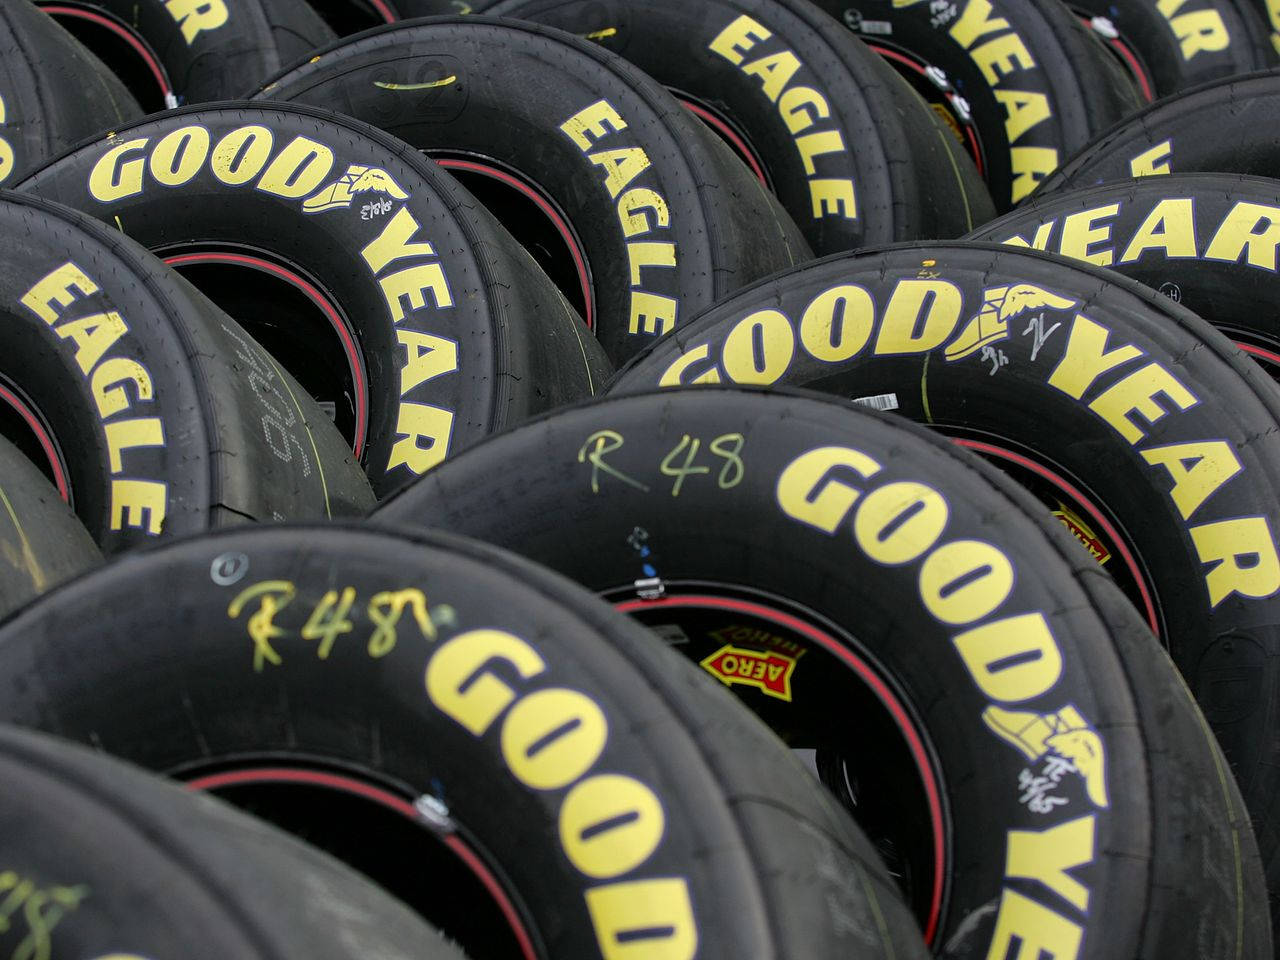 A Collection of Goodyear Black Tires Wallpaper